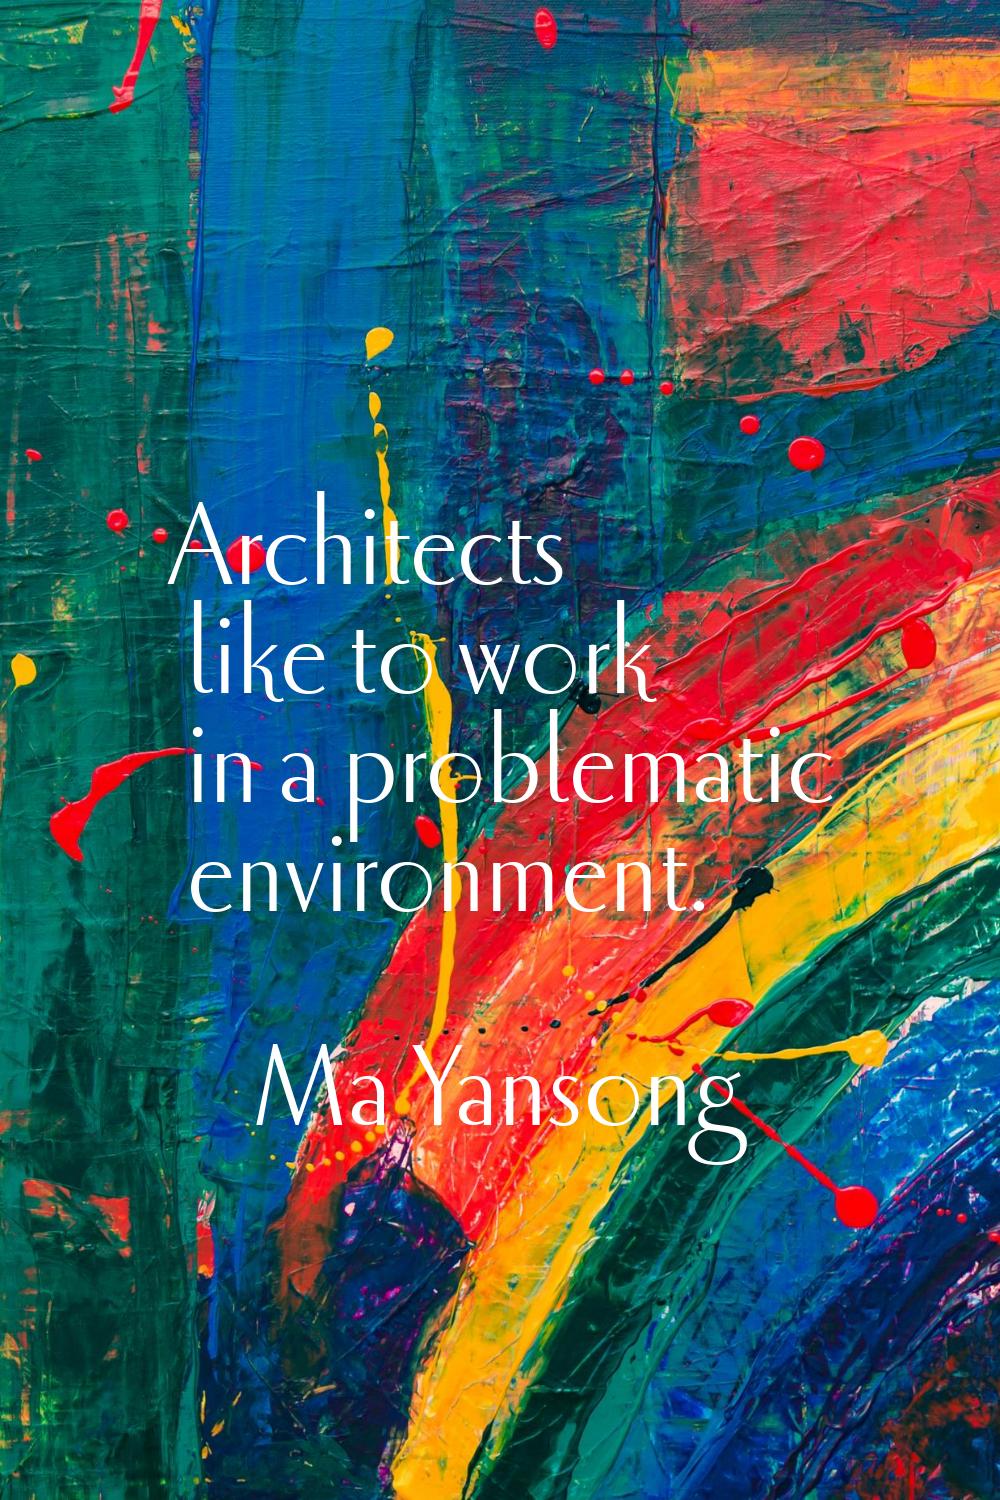 Architects like to work in a problematic environment.